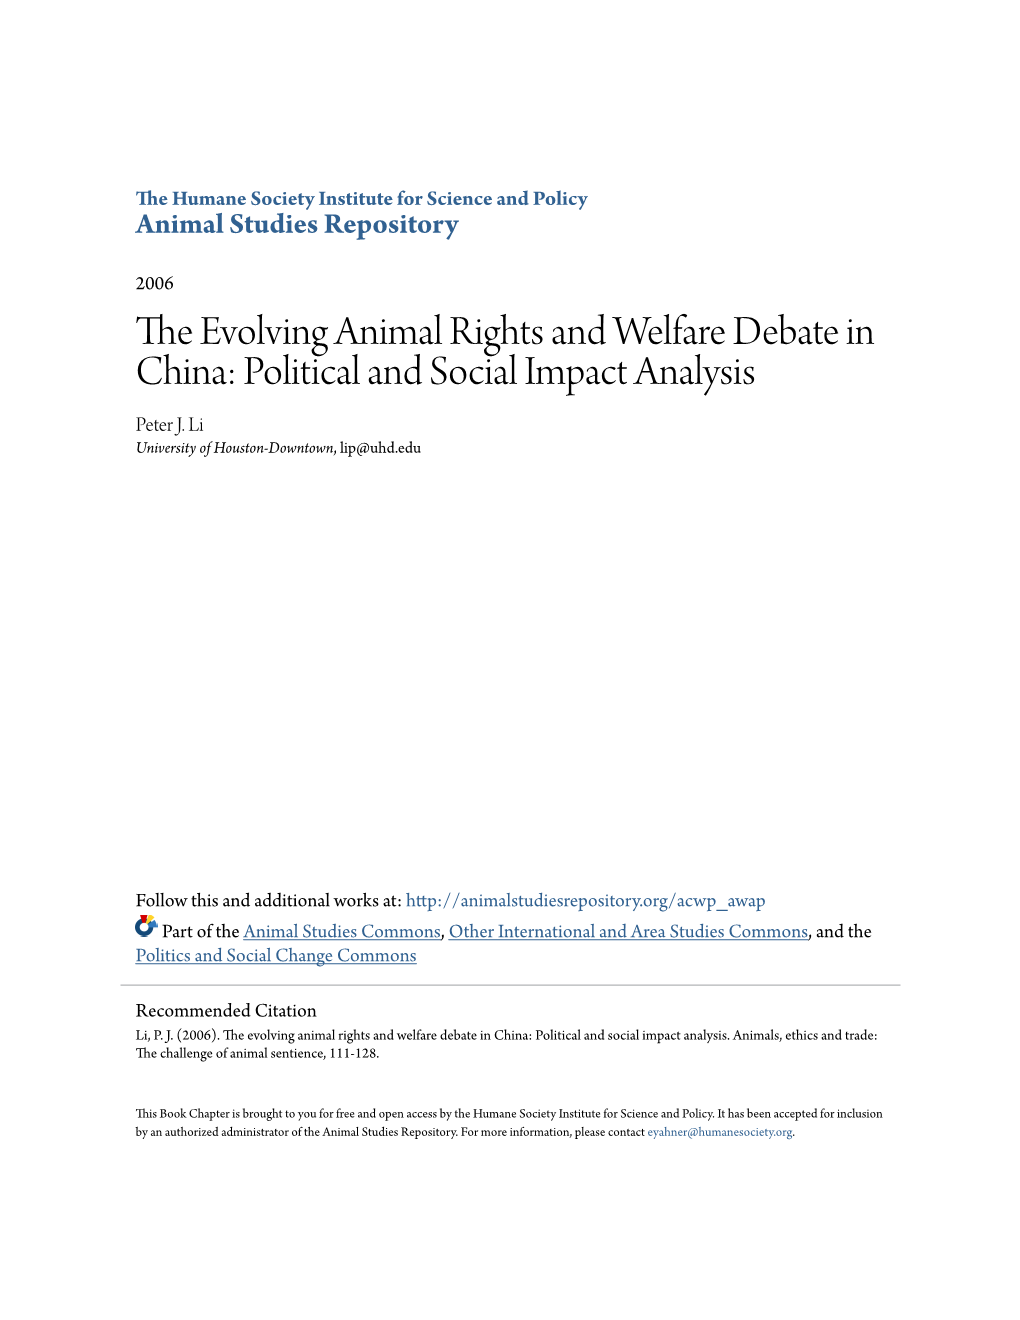 The Evolving Animal Rights and Welfare Debate in China: Political and Social Impact Analysis Peter J